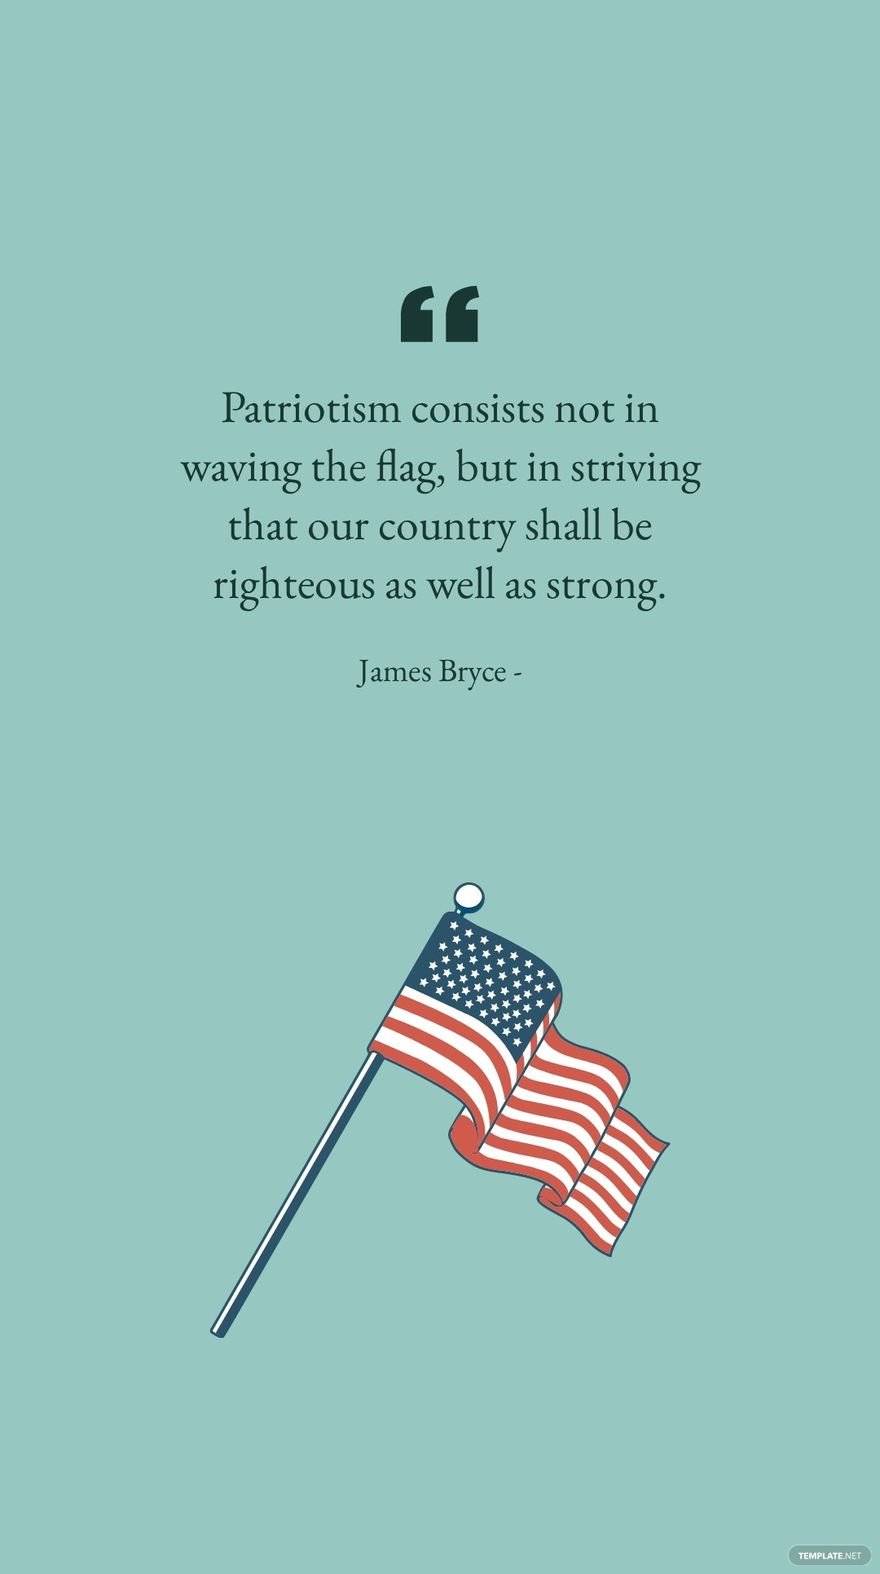 James Bryce - Patriotism consists not in waving the flag, but in striving that our country shall be righteous as well as strong.